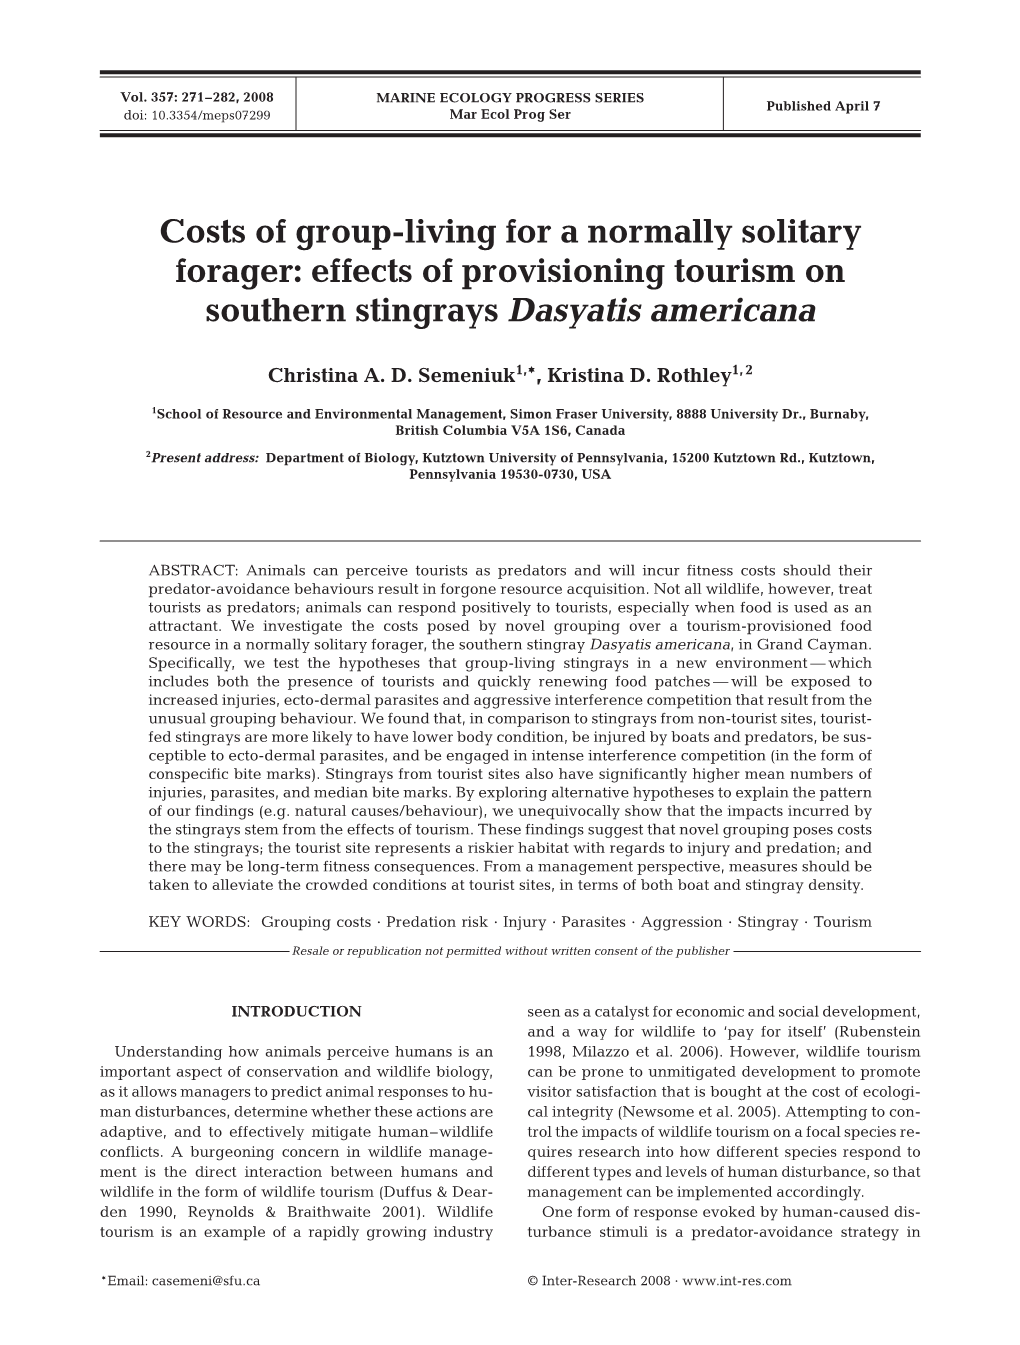 Costs of Group-Living for a Normally Solitary Forager: Effects of Provisioning Tourism on Southern Stingrays Dasyatis Americana